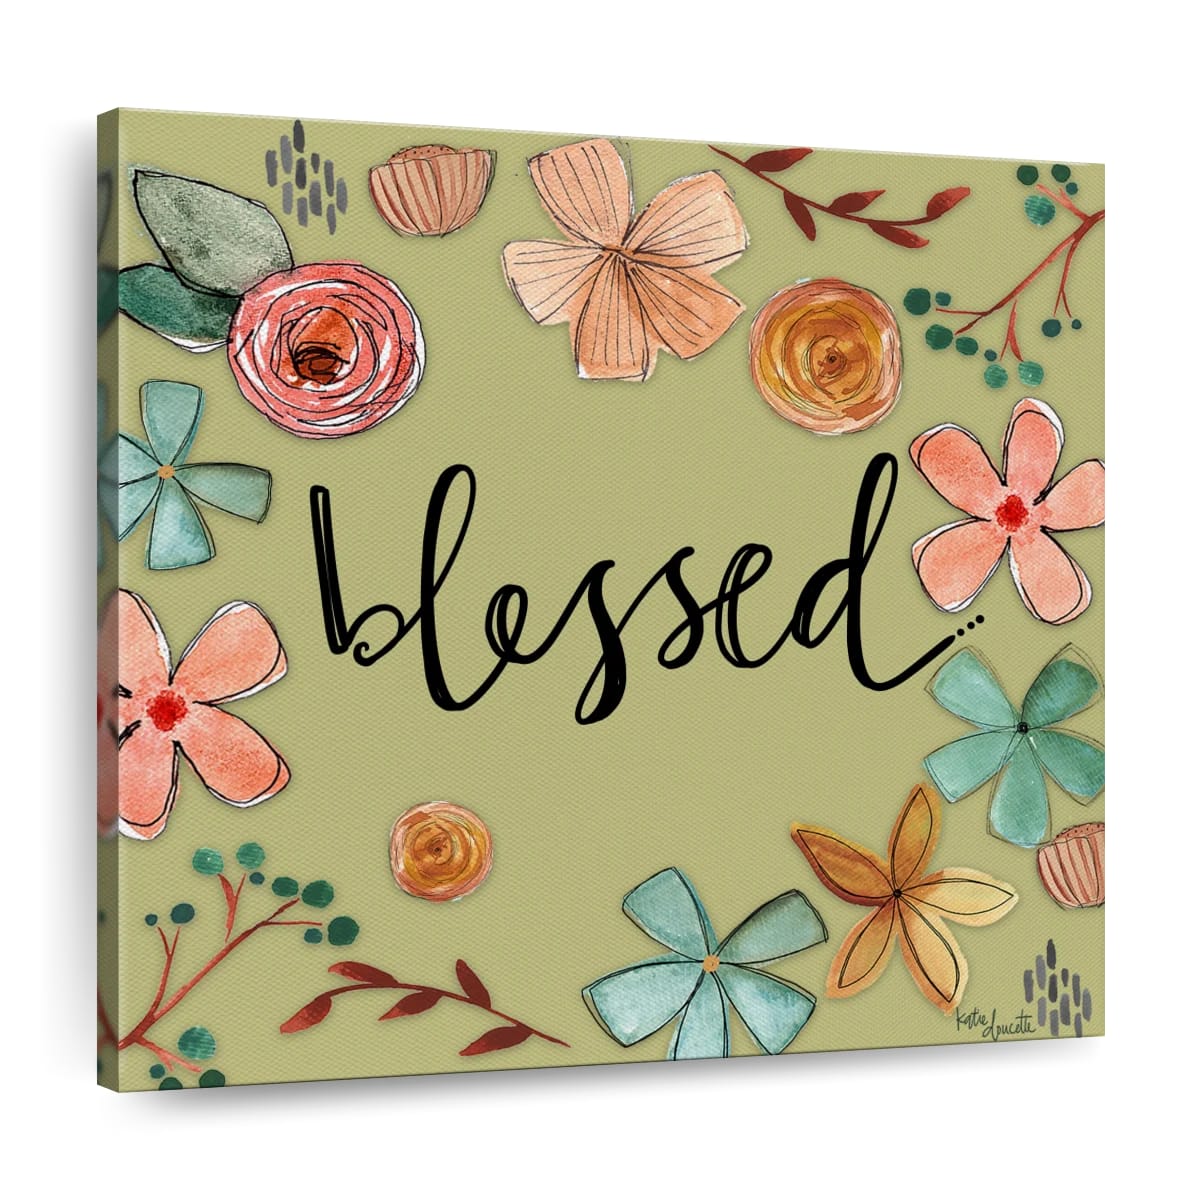 Floral Blessed Square Canvas Wall Art - Bible Verse Wall Art Canvas - Religious Wall Hanging